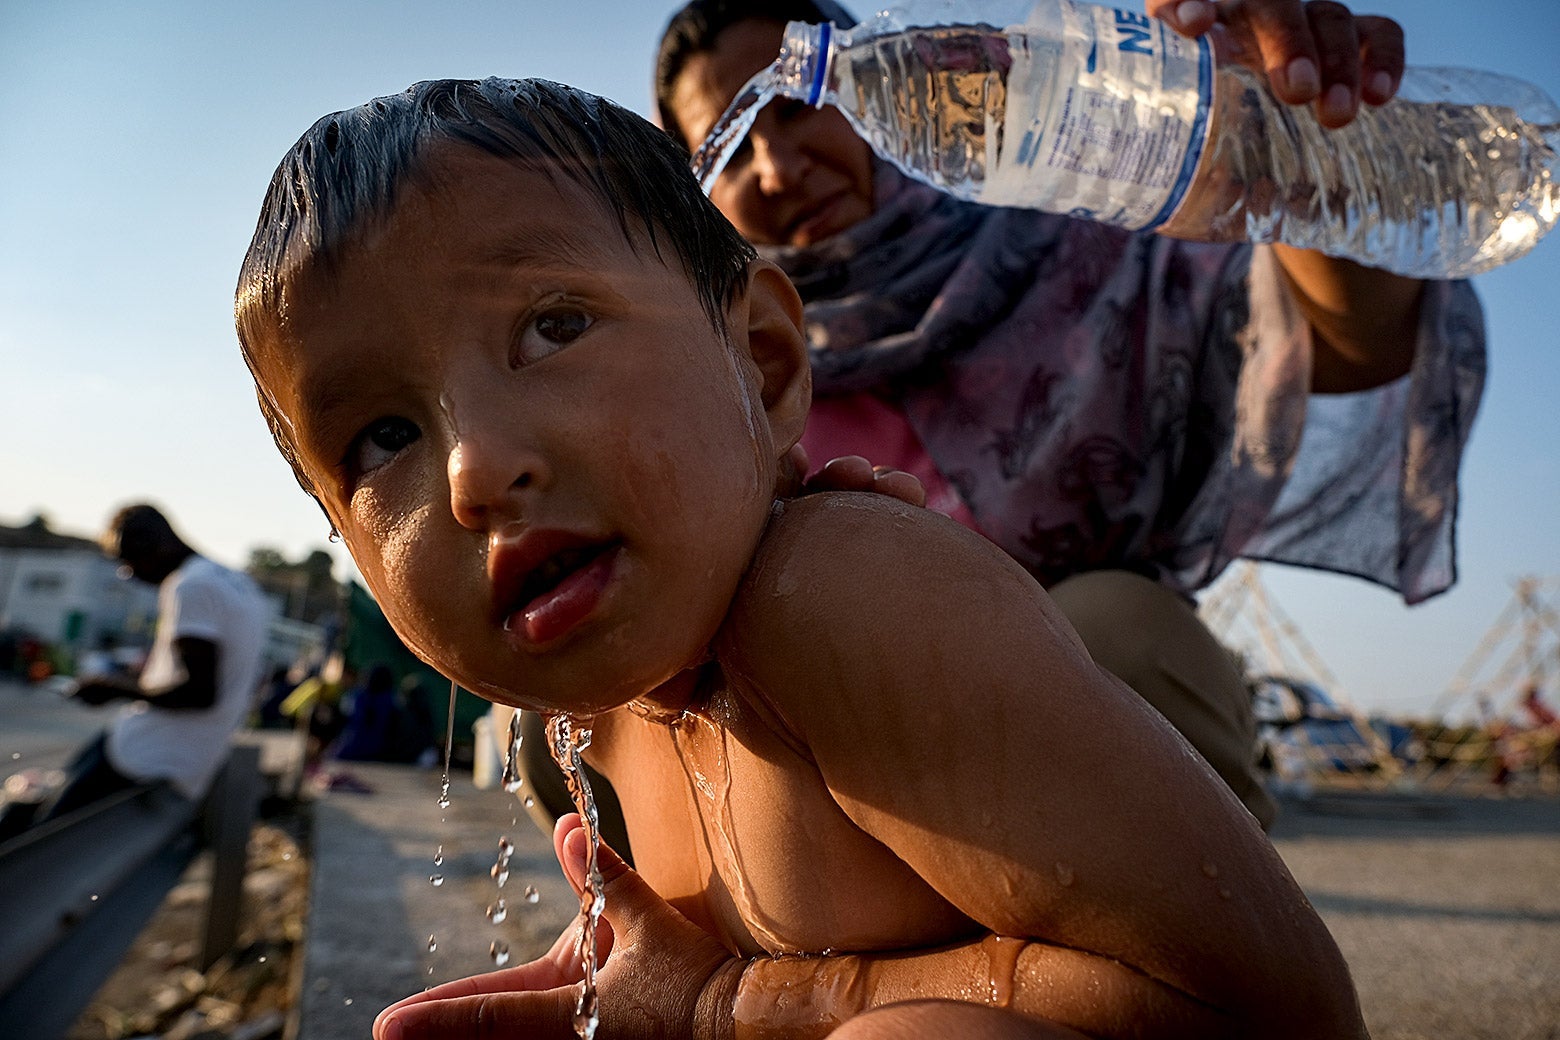 A woman pours water from a plastic water bottle onto a child.